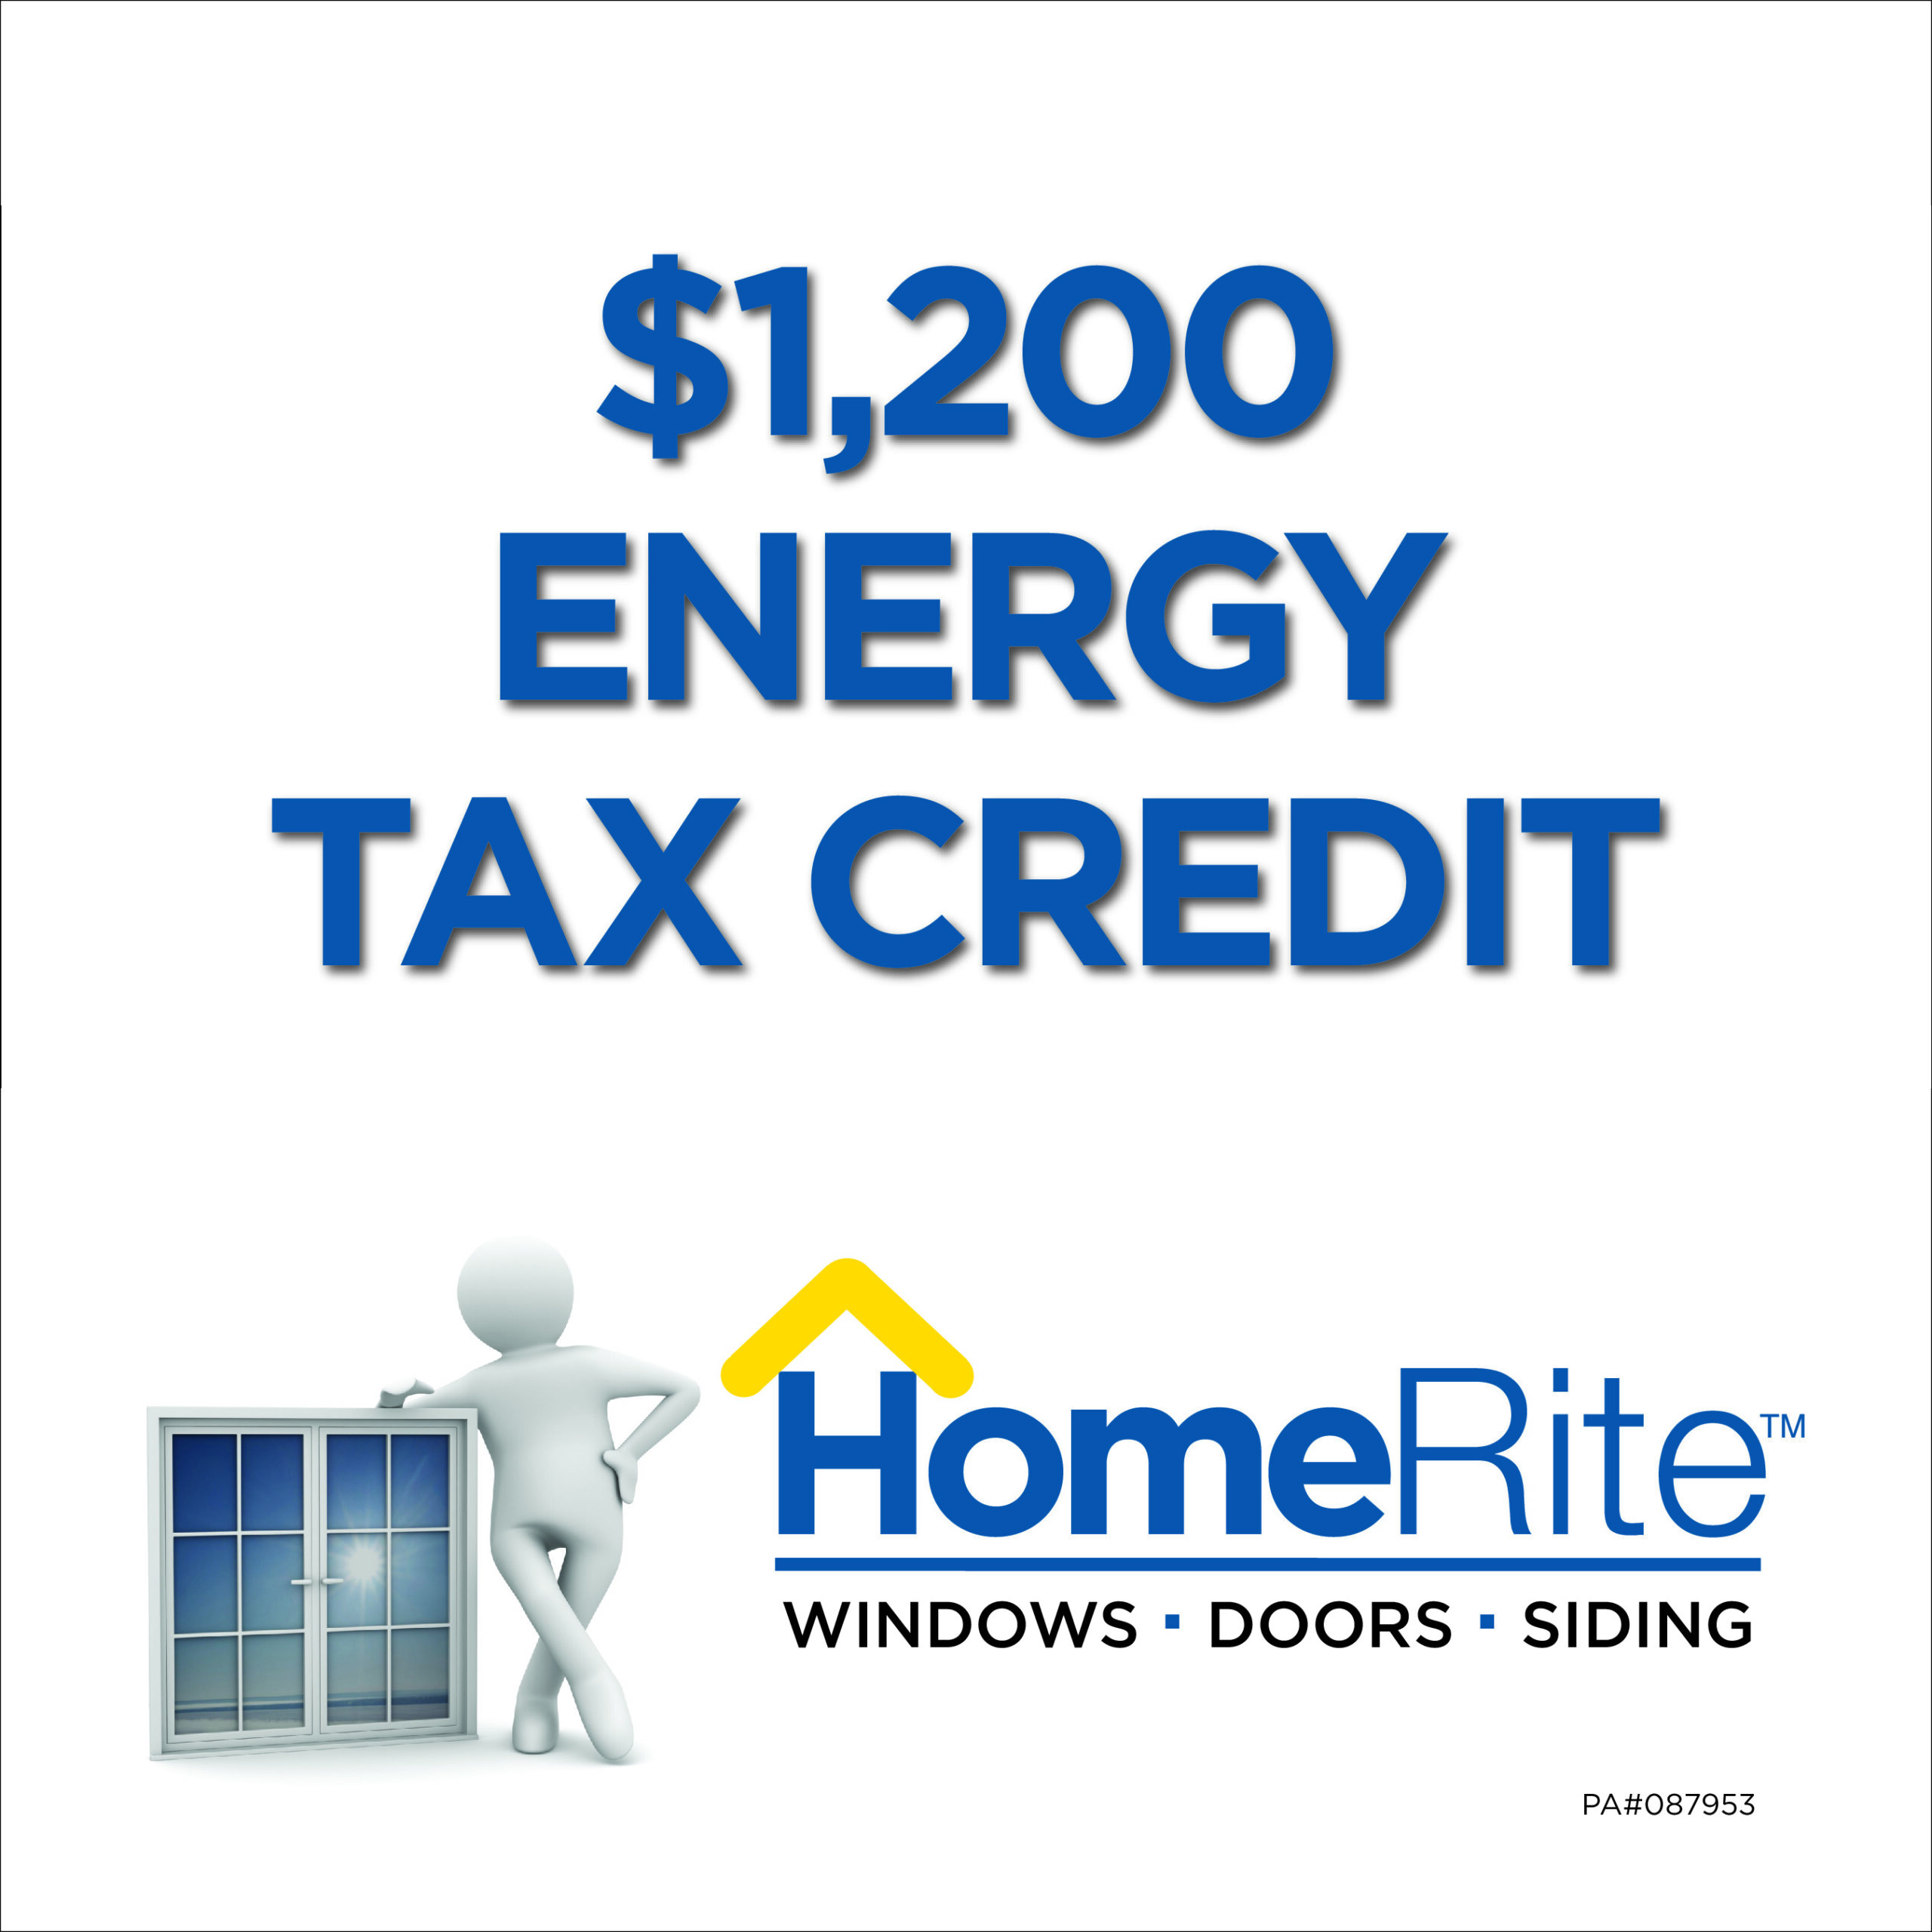 Energy Star Tax Credit Energy Efficient Product HomeRite